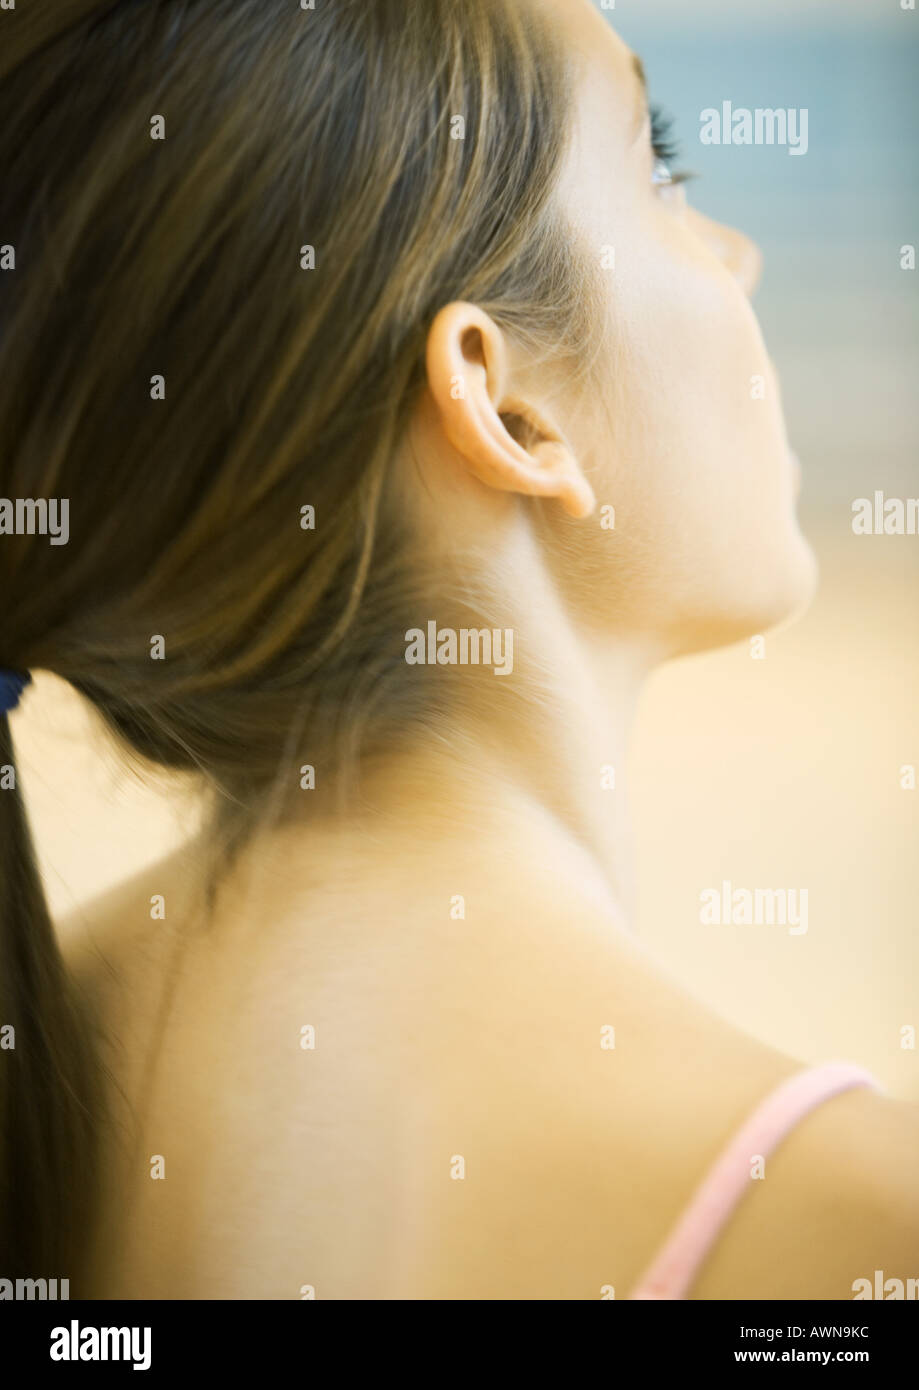 Teen girl, close-up of head and shoulders, rear view Stock Photo